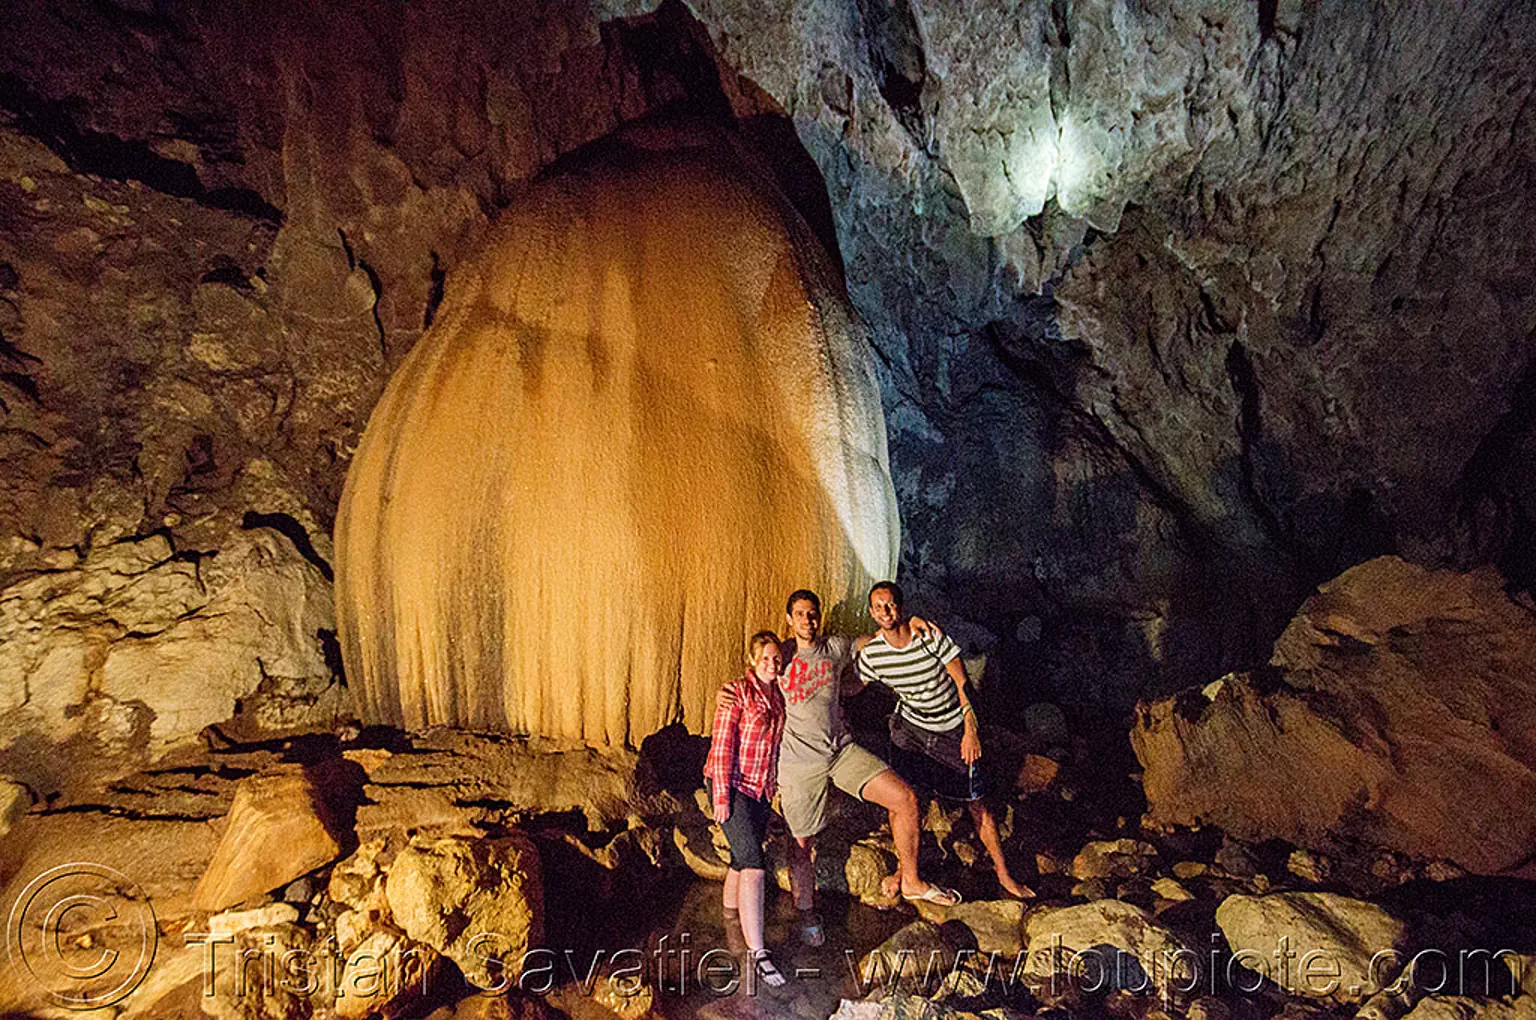 flowstone - lumiang / sumaguing cave - sagada (philippines), cave formations, cavers, caving, concretions, flowstone, lumiang cave, natural cave, philippines, sagada, speleothems, spelunkers, spelunking, sumaguing cave